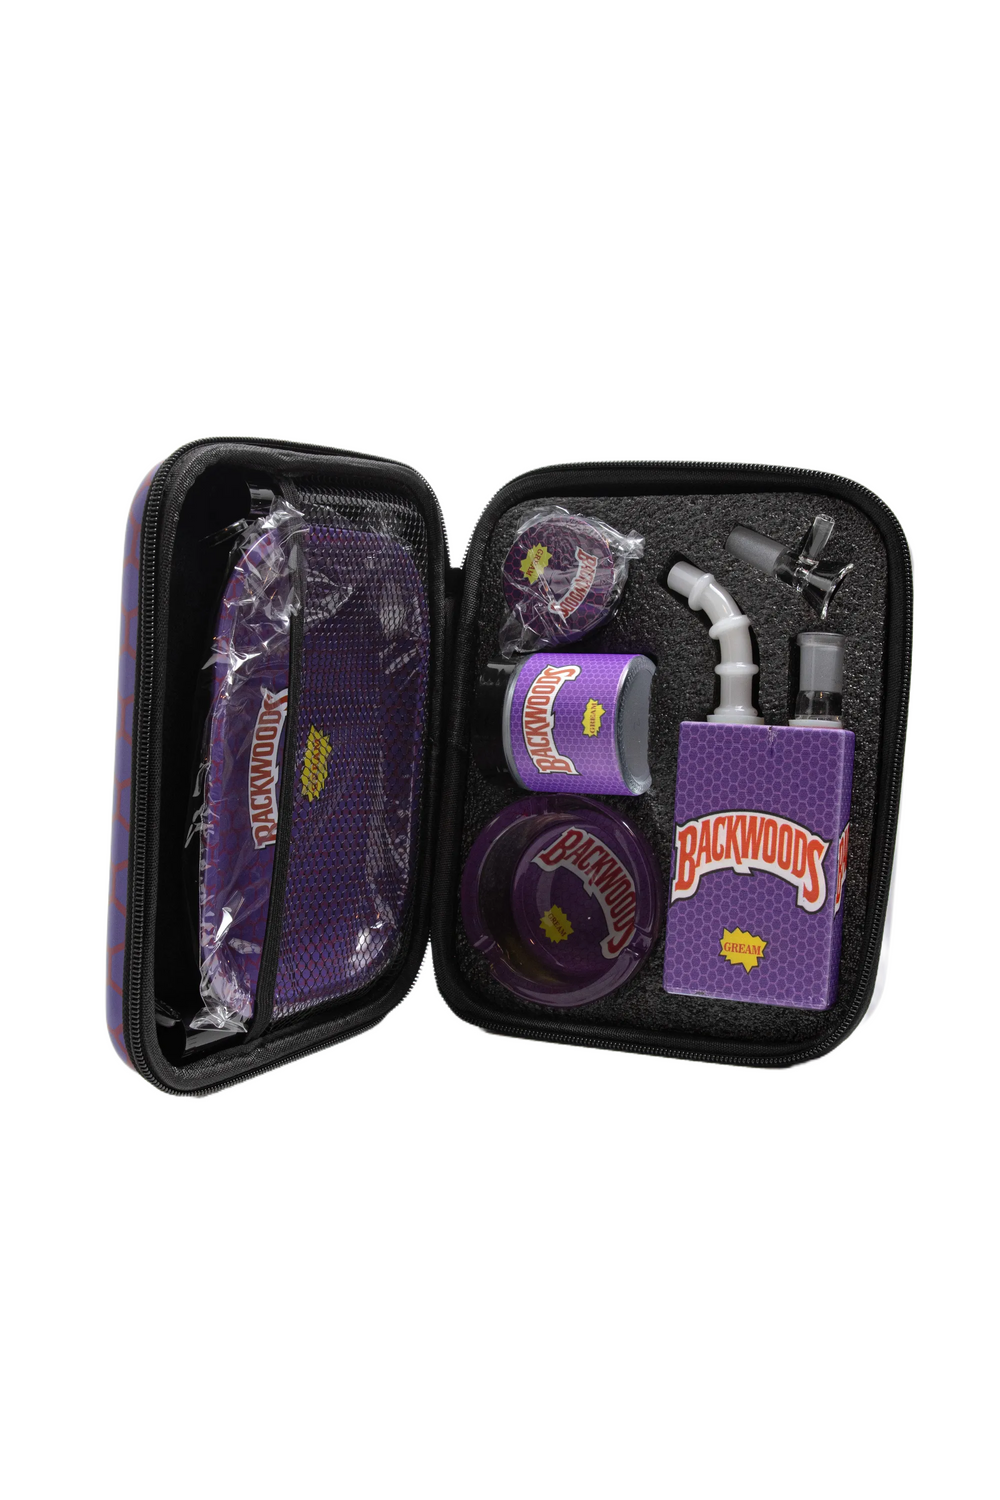 Backwoods Travel COMBO KIT with accessories